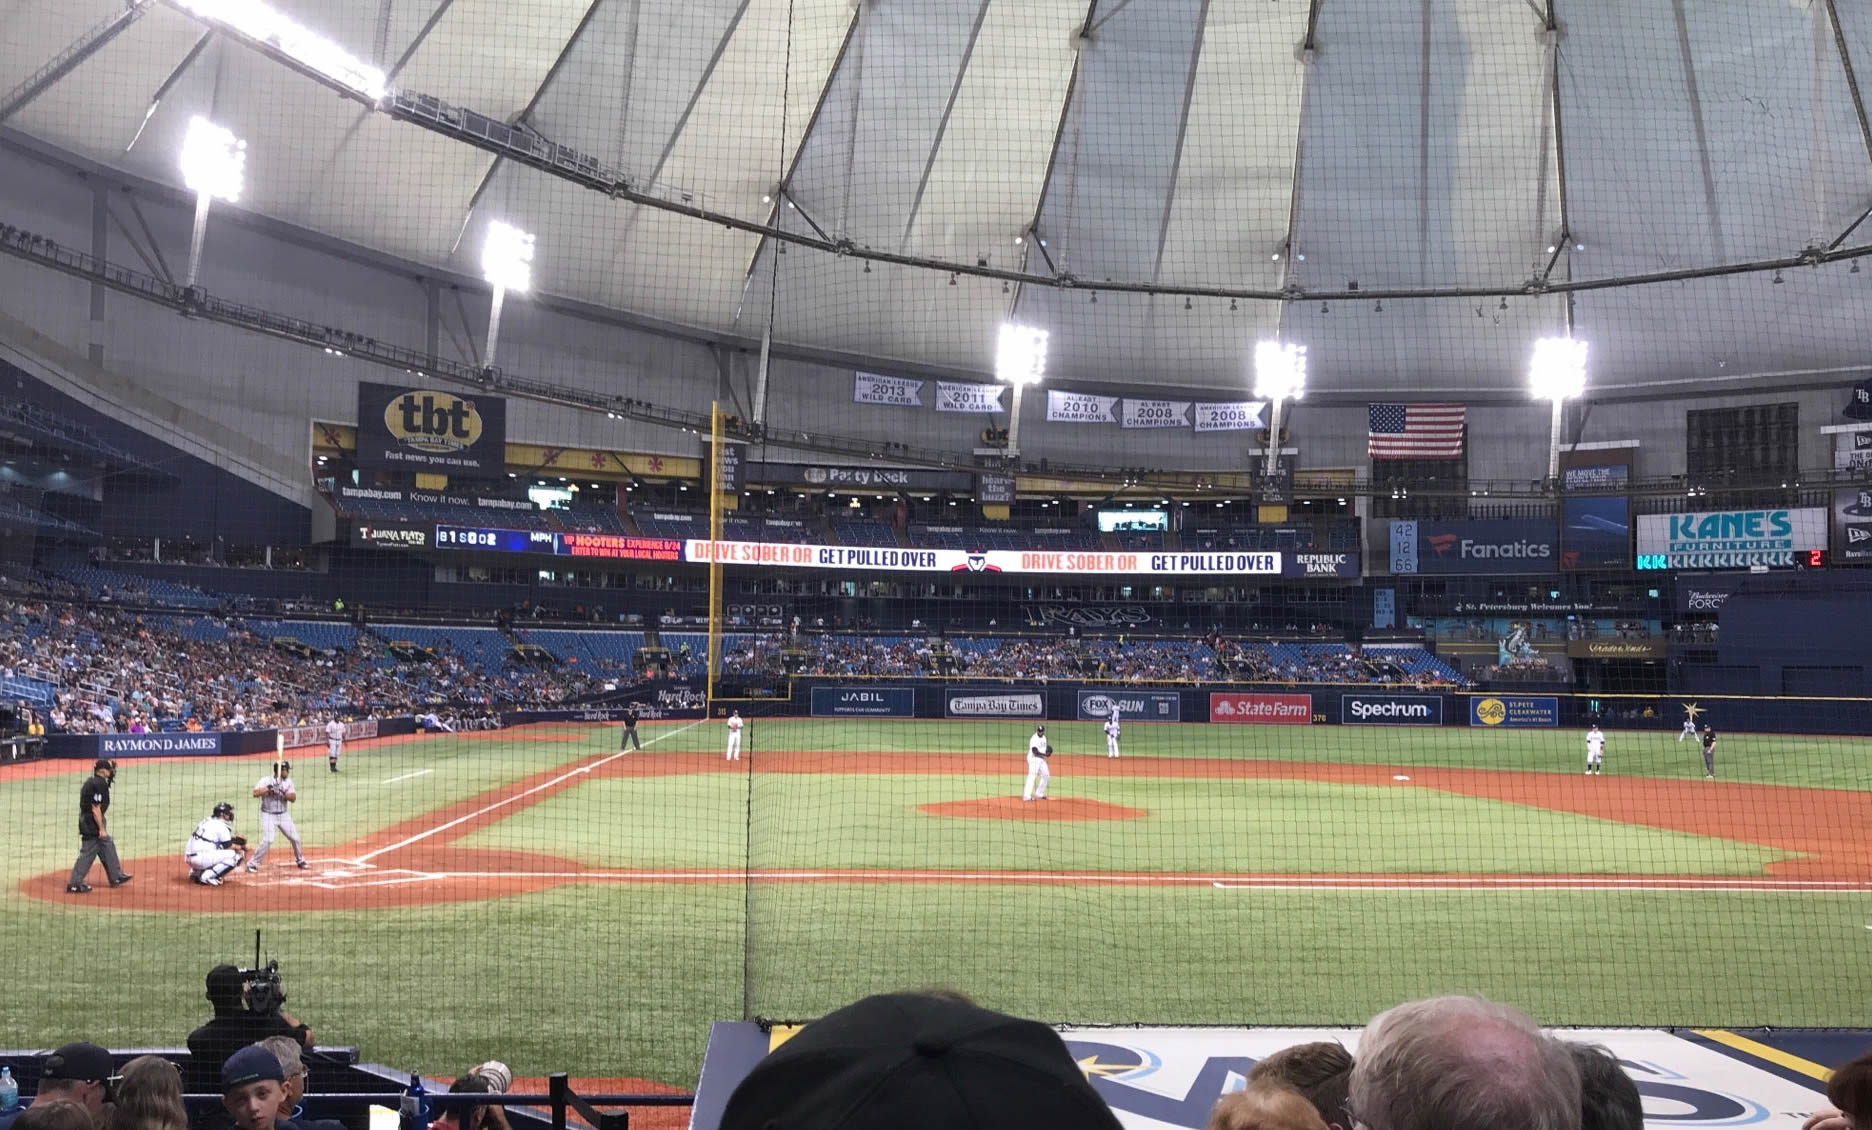 Section 112 at Tropicana Field 